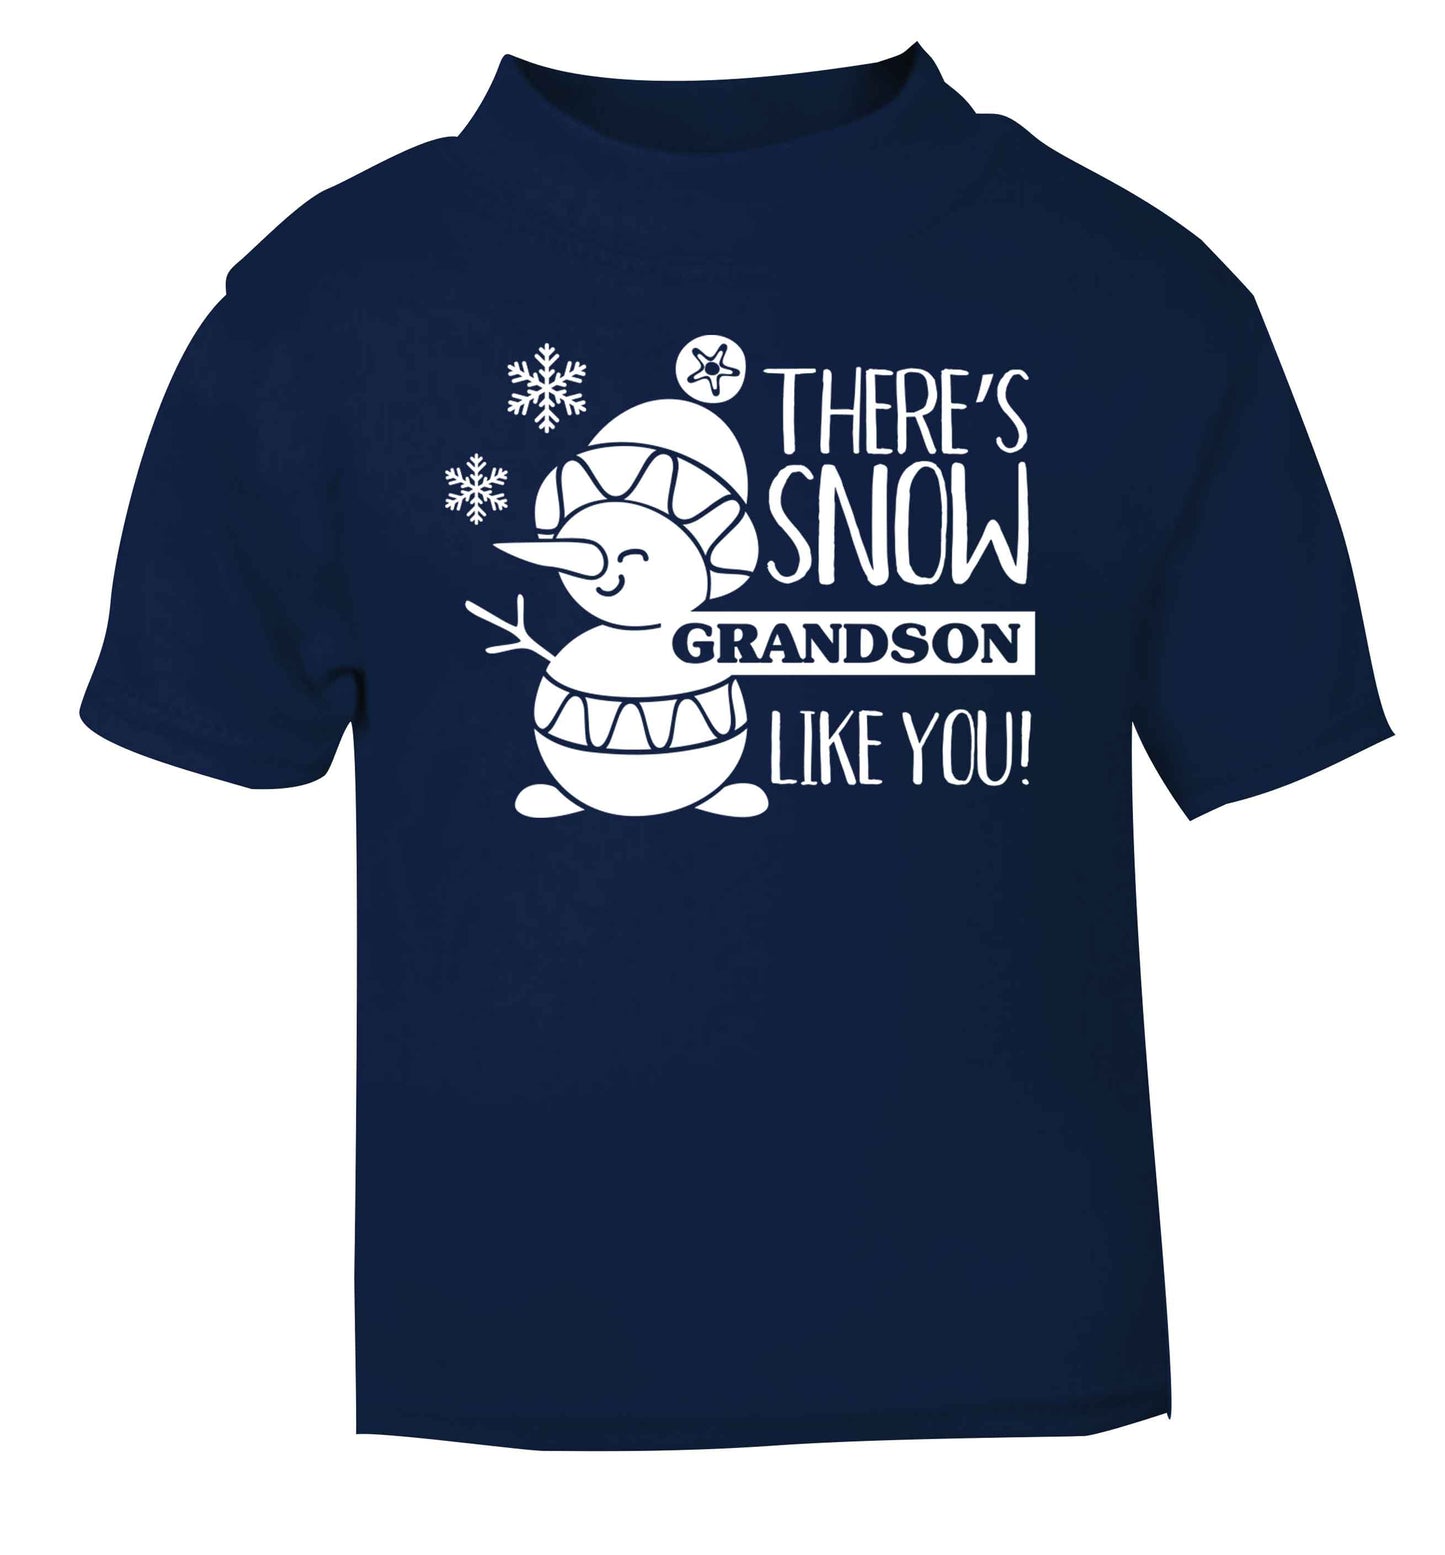 There's snow grandson like you navy baby toddler Tshirt 2 Years